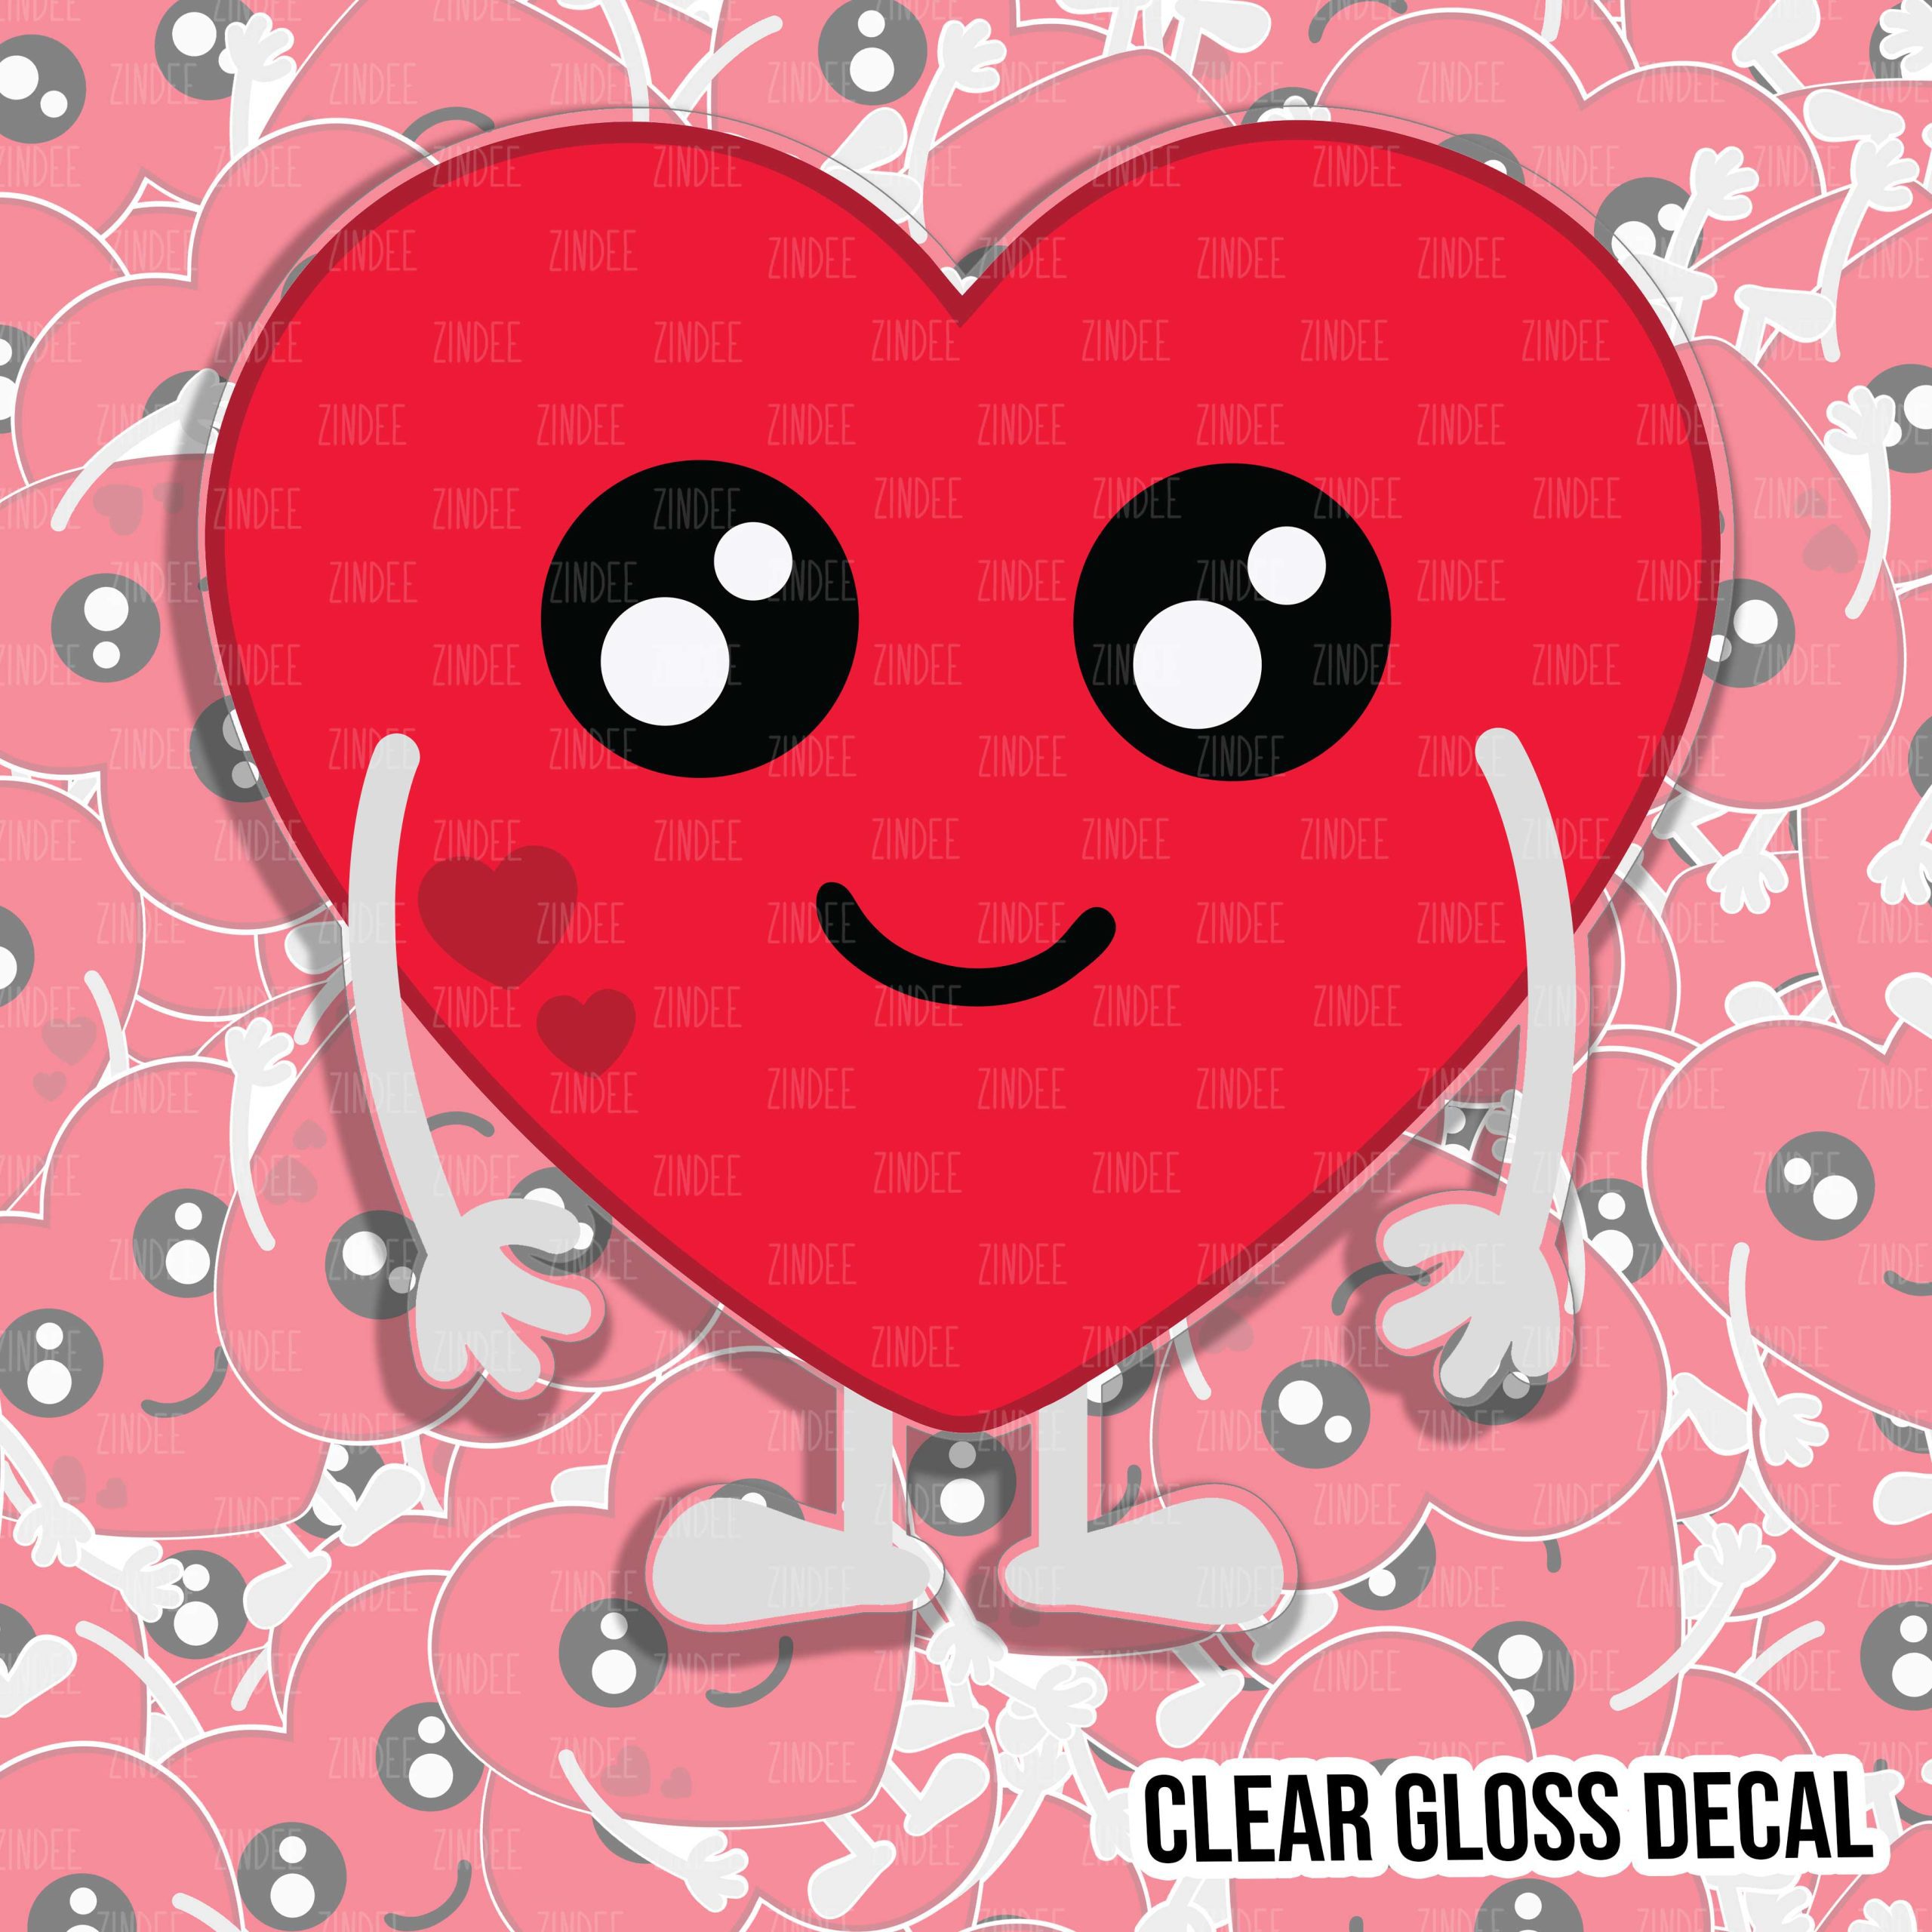 Pink Heart Stickers 1.5 Inch